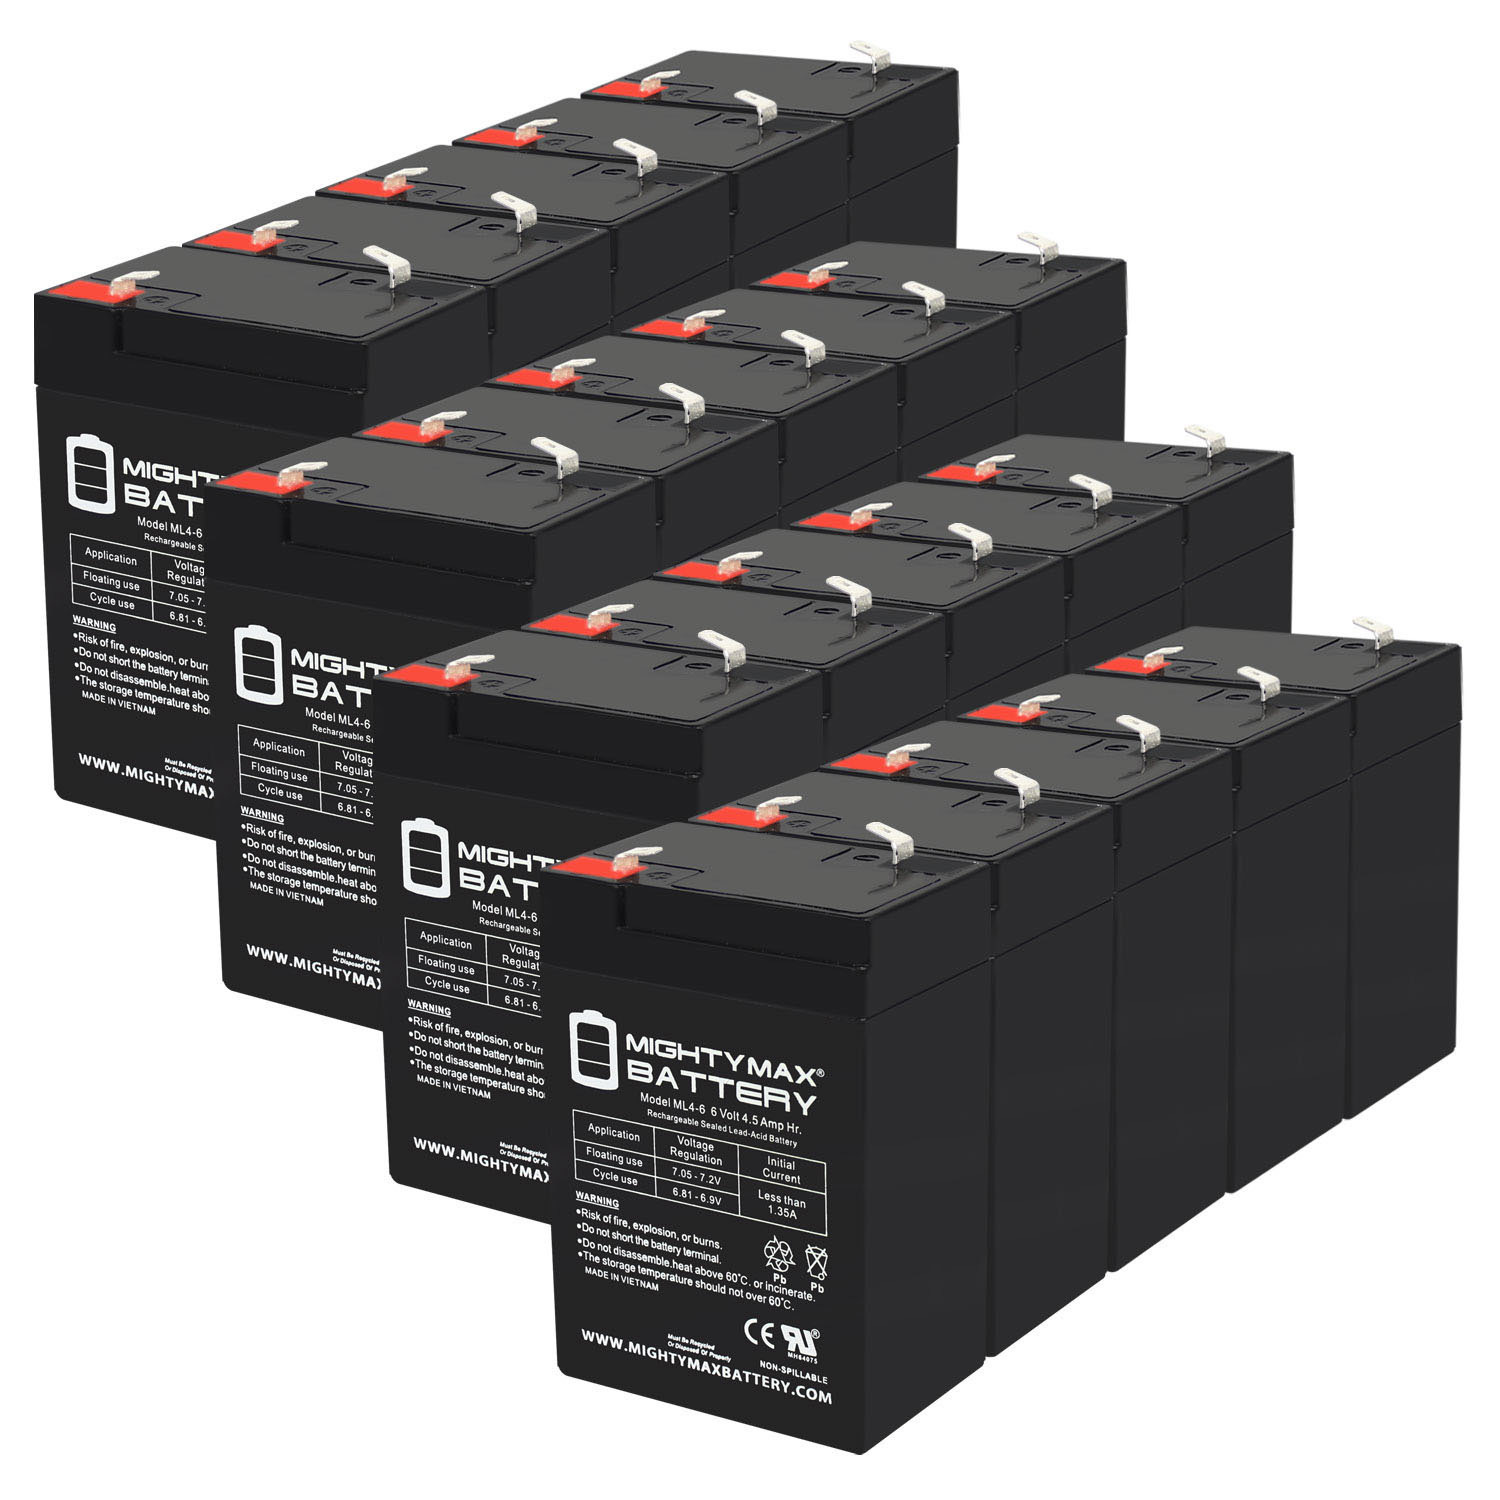 6V 4.5AH SLA Replacement Battery for Dual-Lite DKURWE - 20 Pack